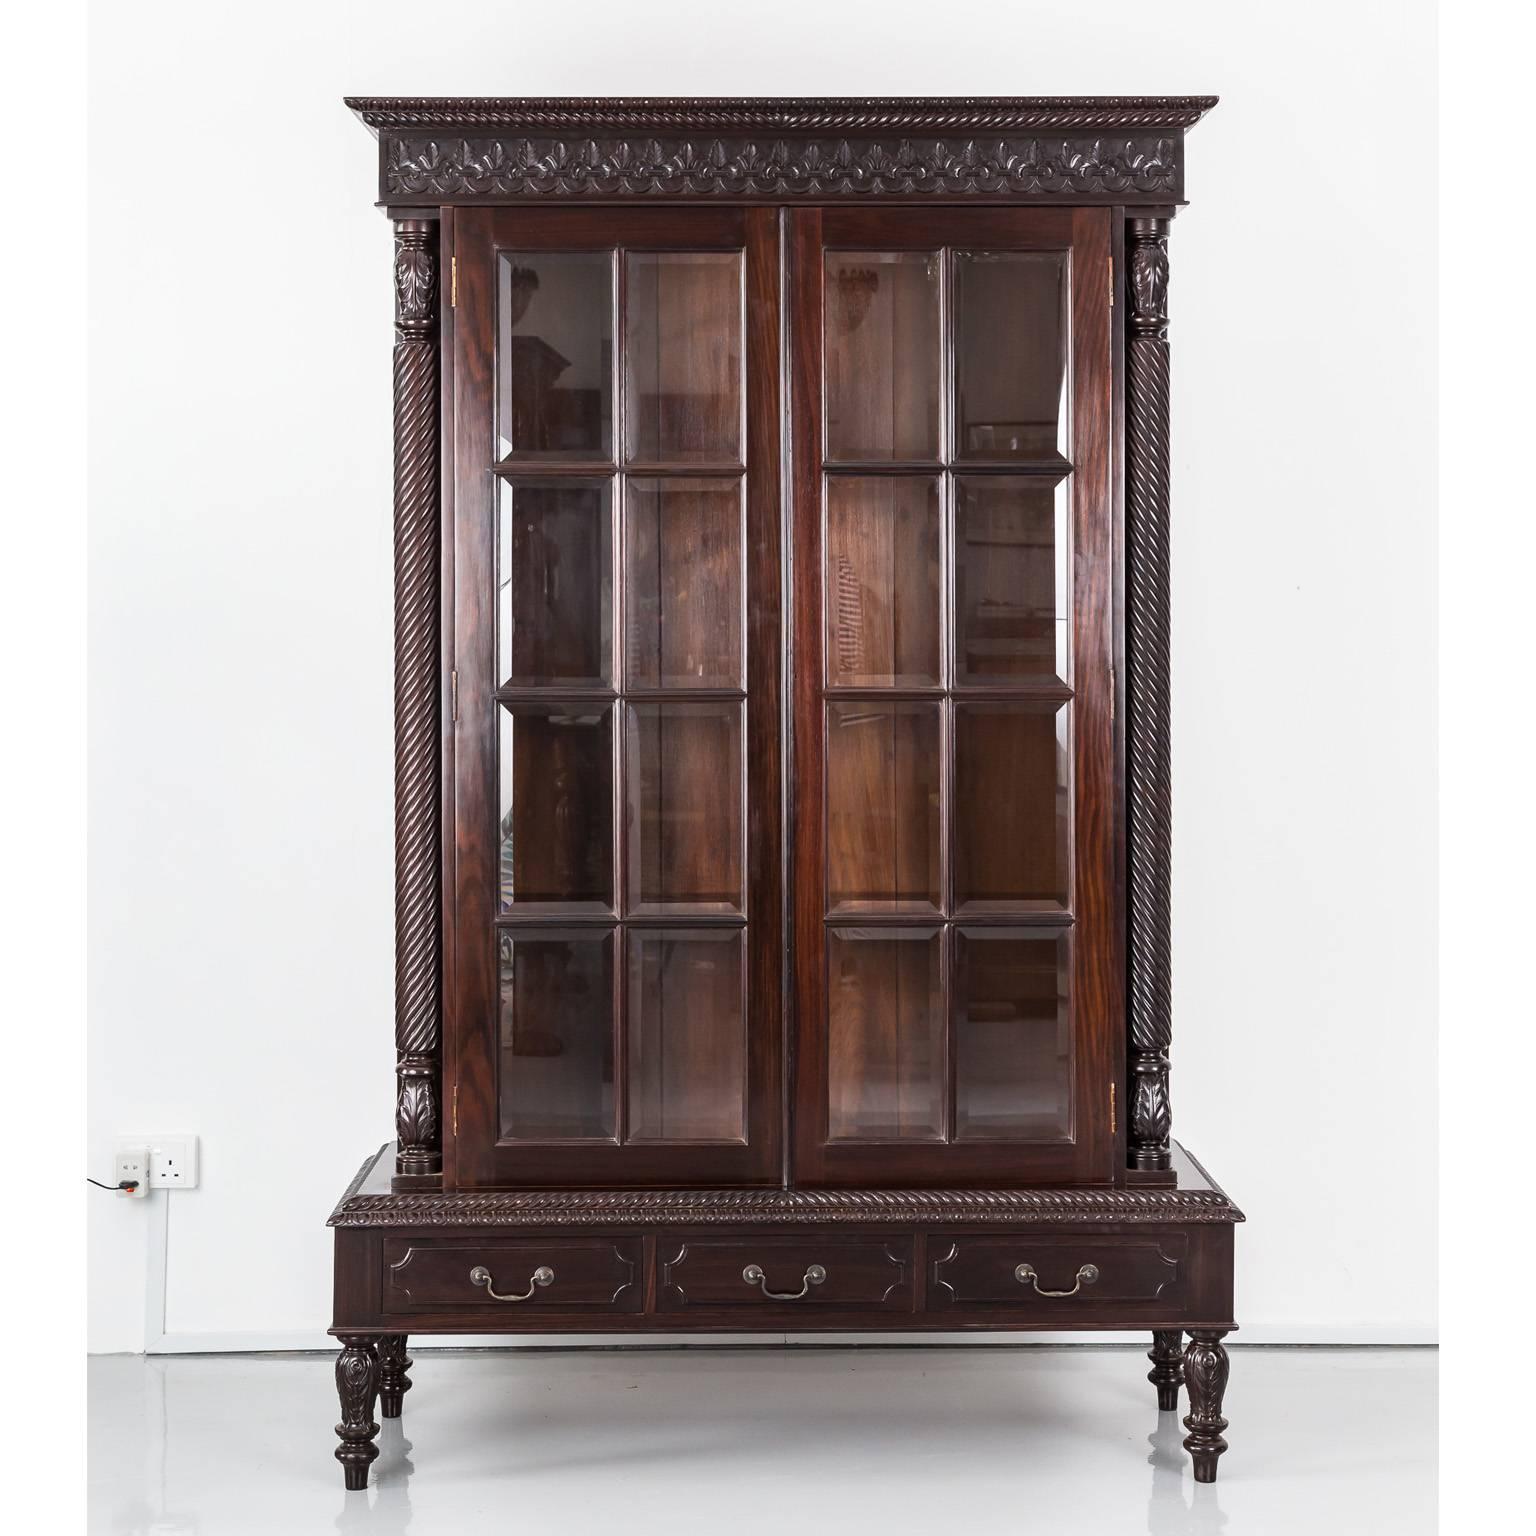 A beautiful British Colonial cabinet in rosewood with a deep moulded and carved cornice. The frieze is relief carved in a floral pattern. Set back from the base, the cabinet has double doors with eight bevelled glass panels flanked by two spirally